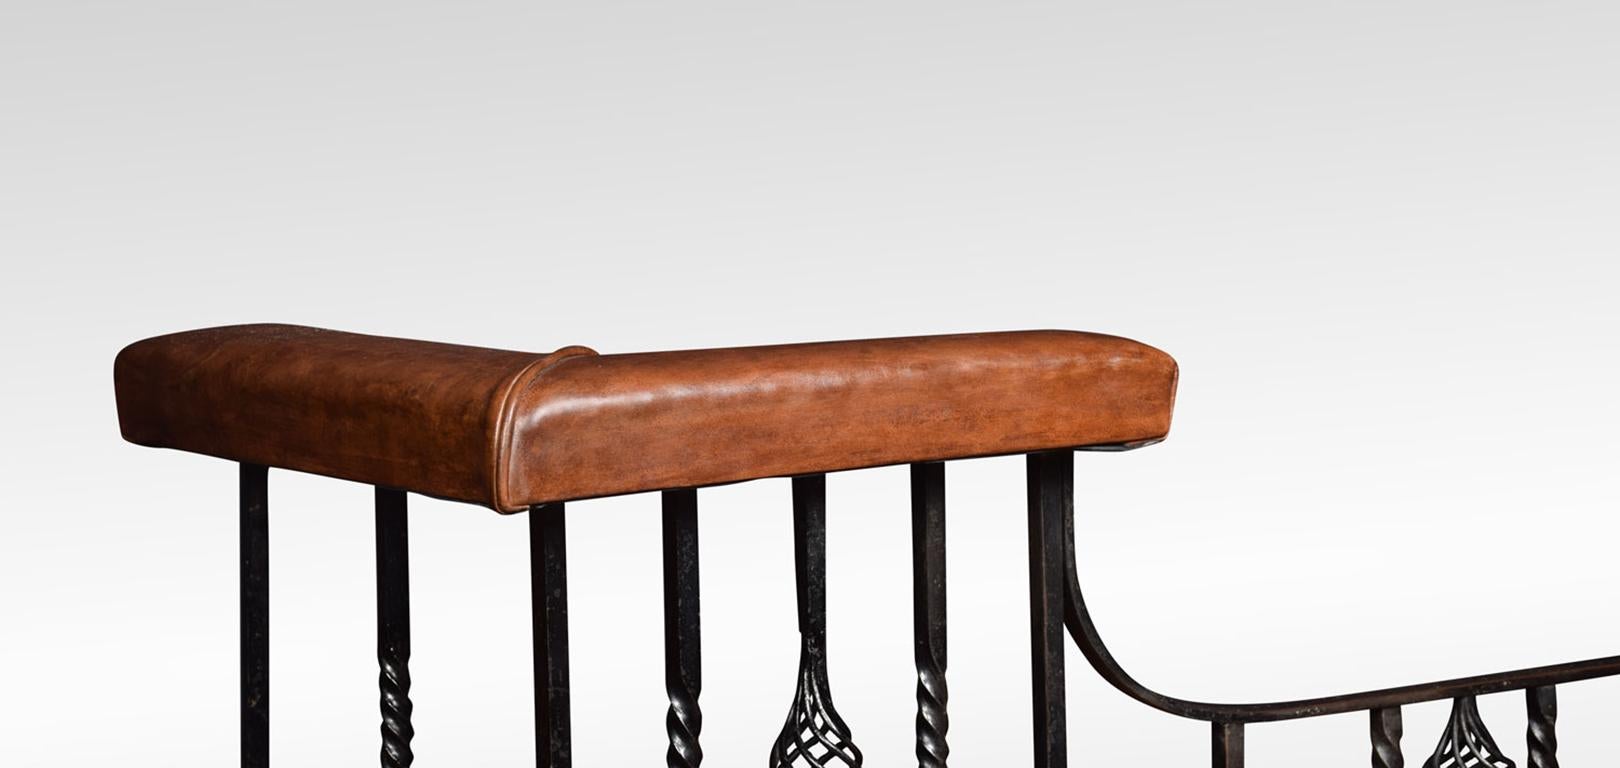 Wrought iron club fender, the leather upholstered padded seat, on square section supports with spiral decoration. All raised up on plinth base.
Dimensions
Height 20 inches
External measurements
Length 62.5 inches
Depth 24 inches
Internal